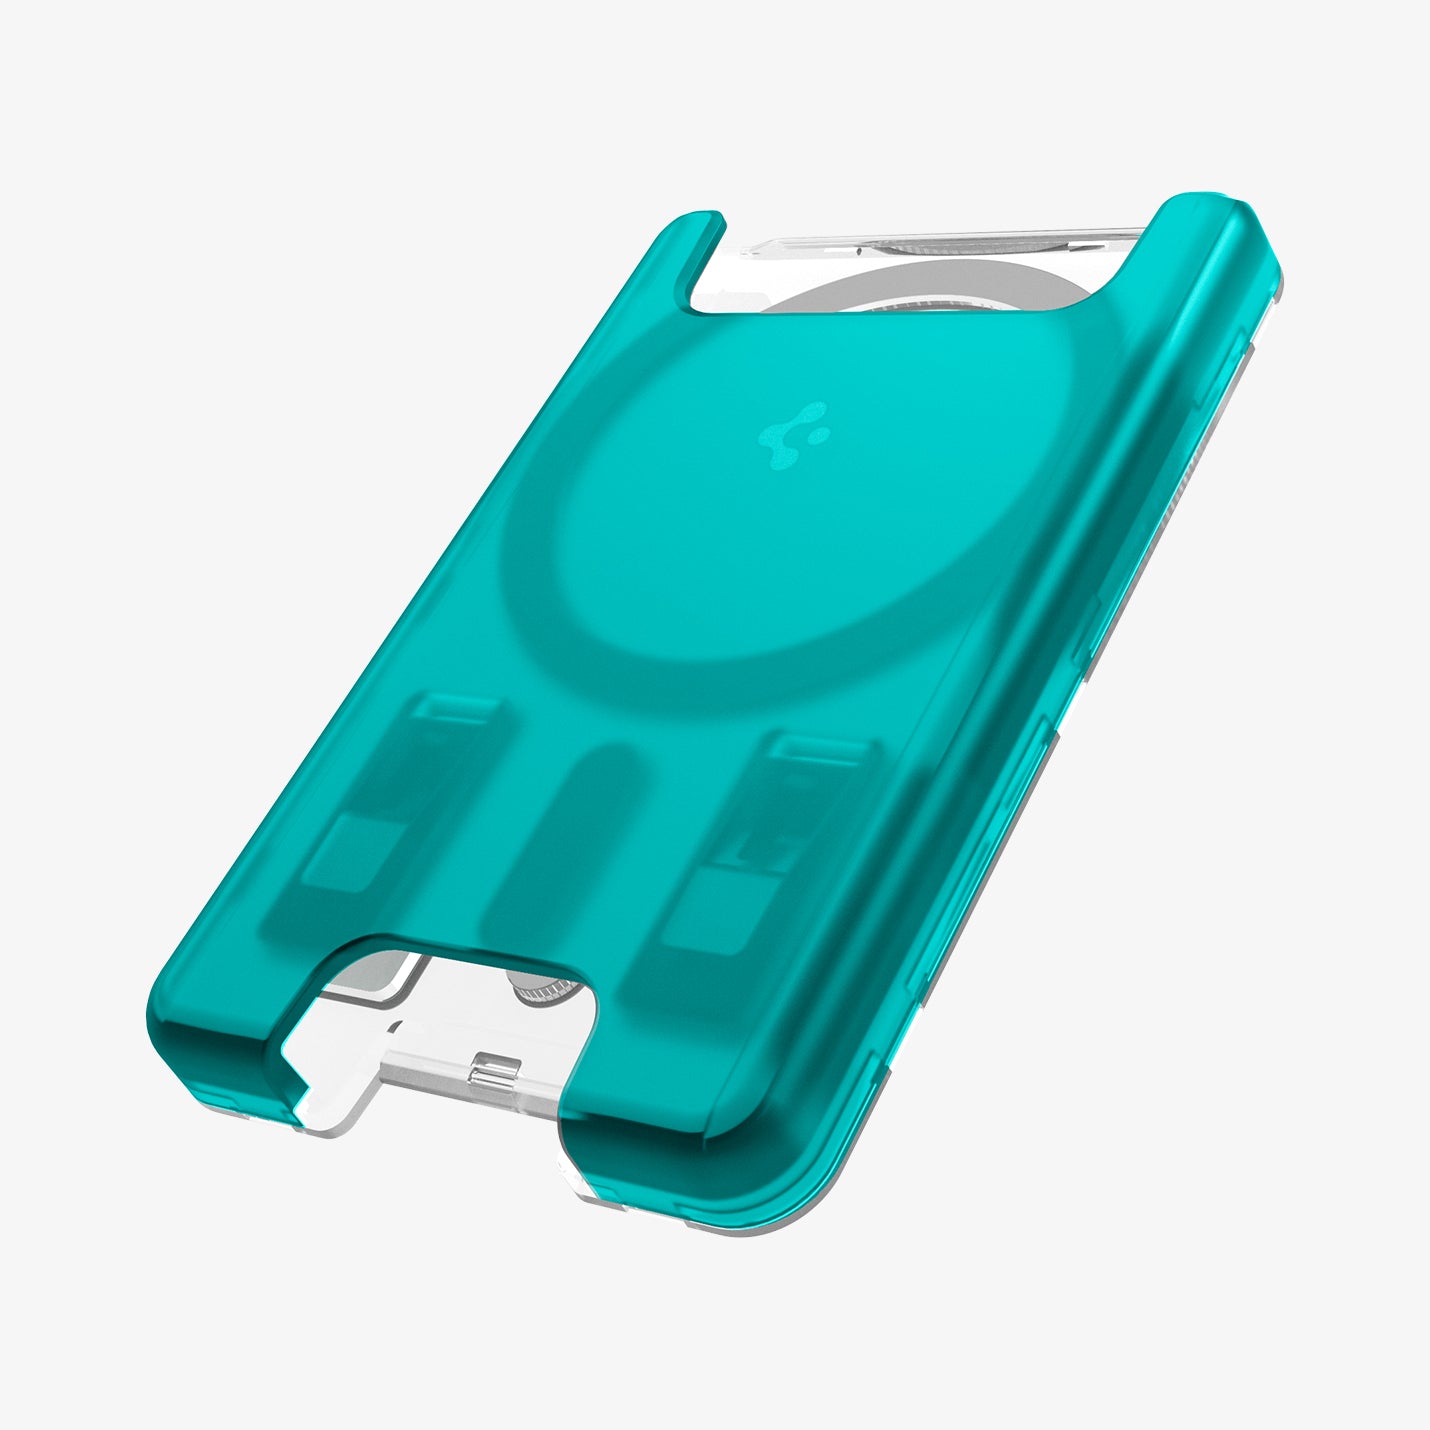 AFA07397 - MagSafe Card Holder Classic C1 (MagFit) in Bondi Blue showing the front, partial side, bottom zoomed in